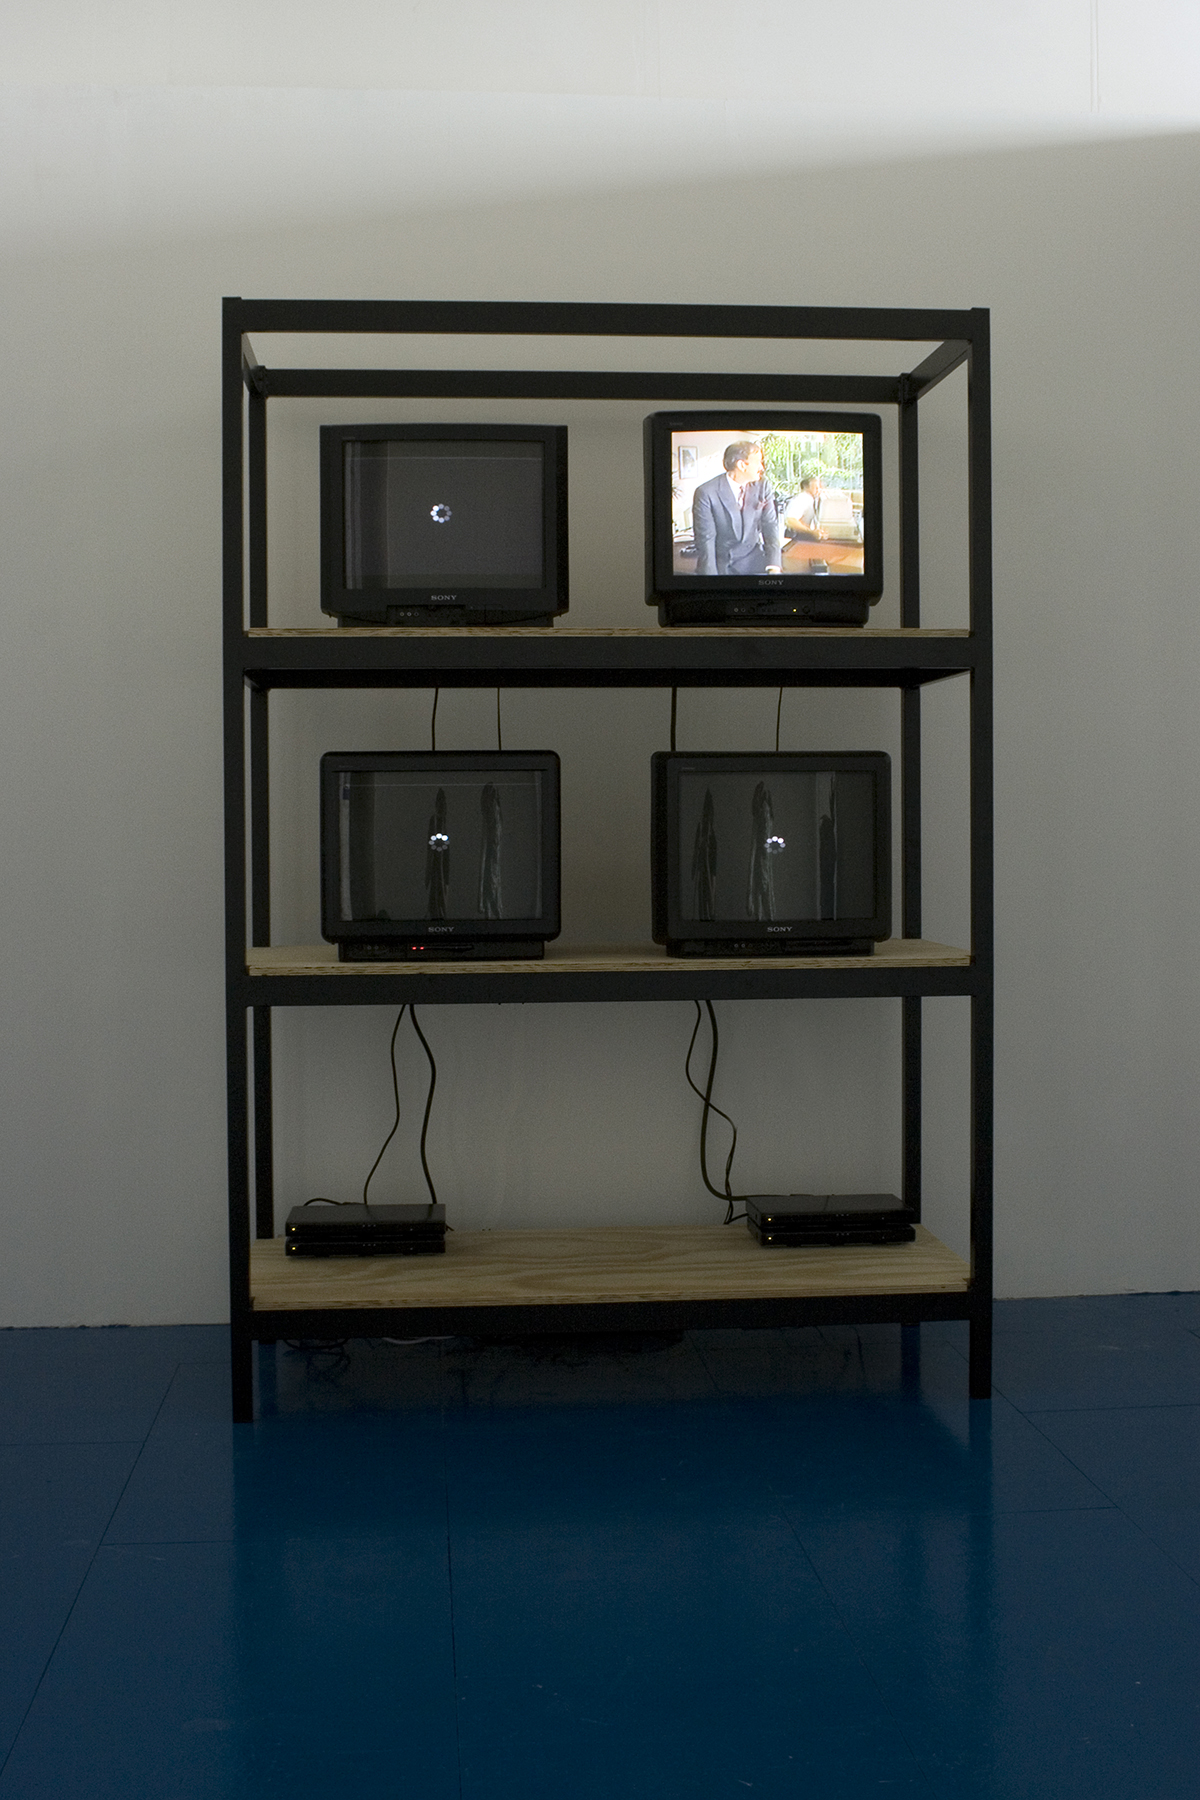 Say Standing Reserve, Say Computers, Tellys, Encyclopedias, Amateurs and Art,2011, installation view